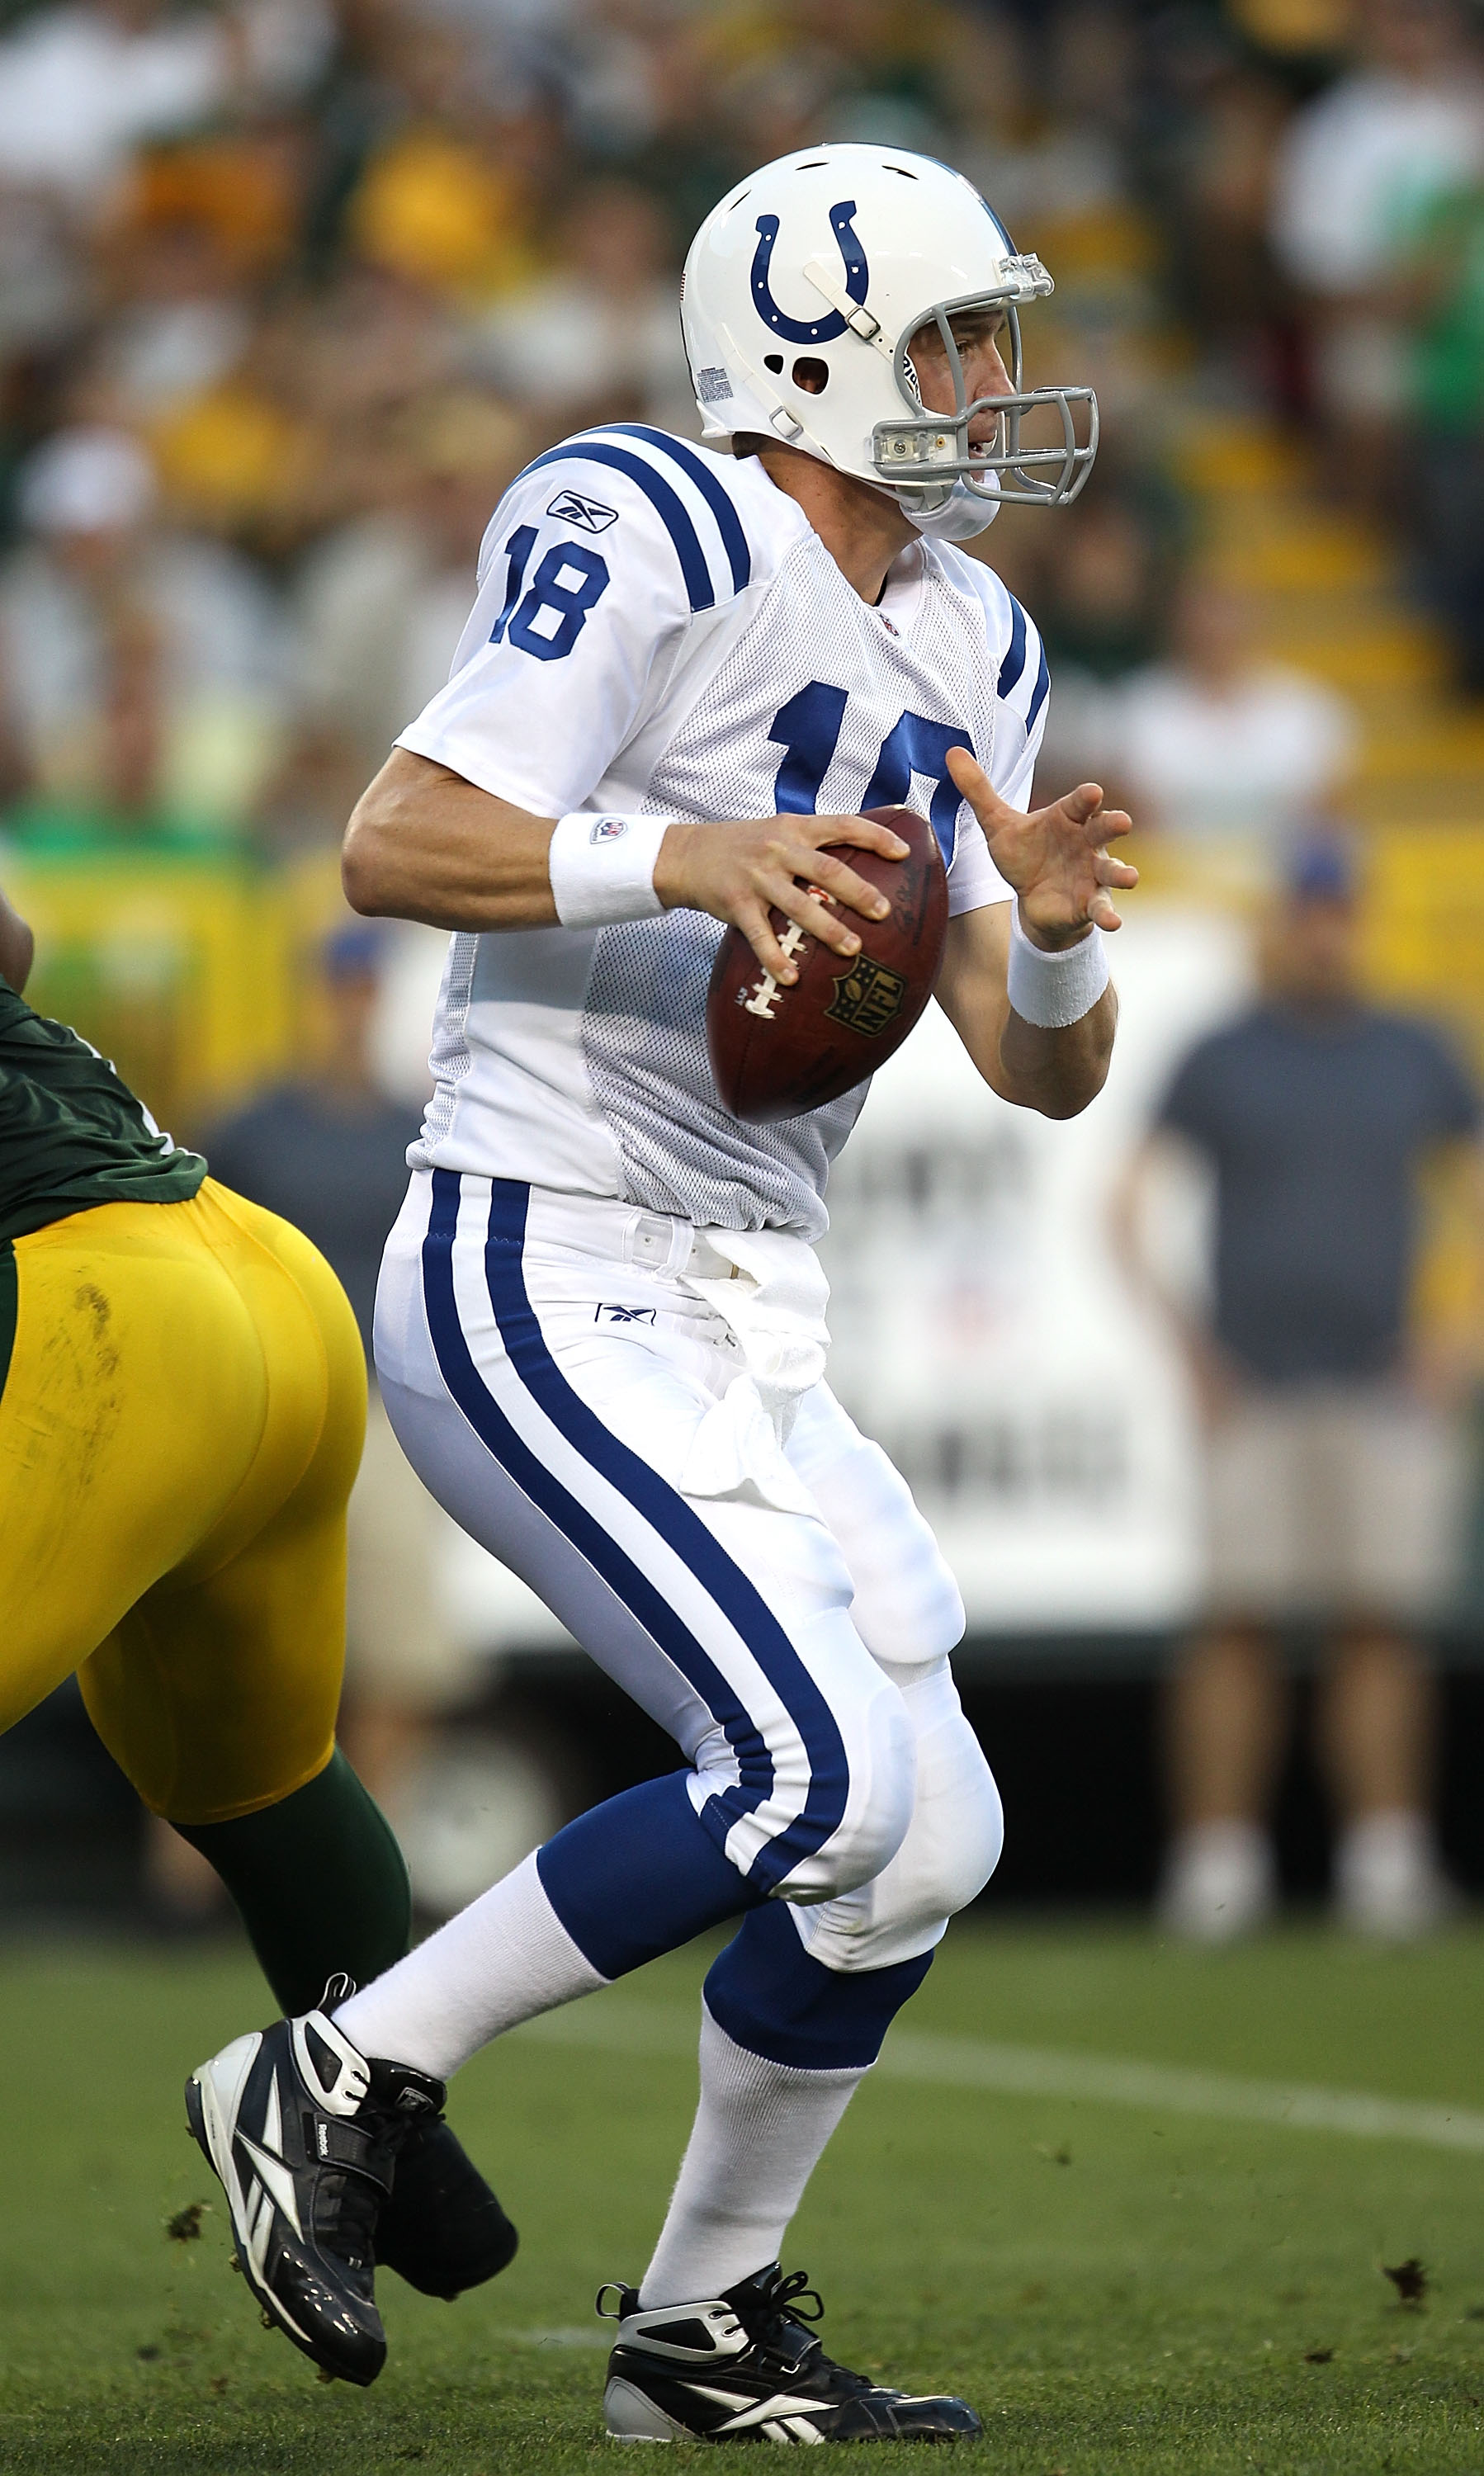 GREEN BAY, WI - AUGUST 26: Peyton Manning #18 of the Indianapolis Colts looks for a receiver against the Green Bay Packers during a preseason game at Lambeau Field on August 26, 2010 in Green Bay, Wisconsin. The Packers defeated the Colts 59-24.  (Photo b